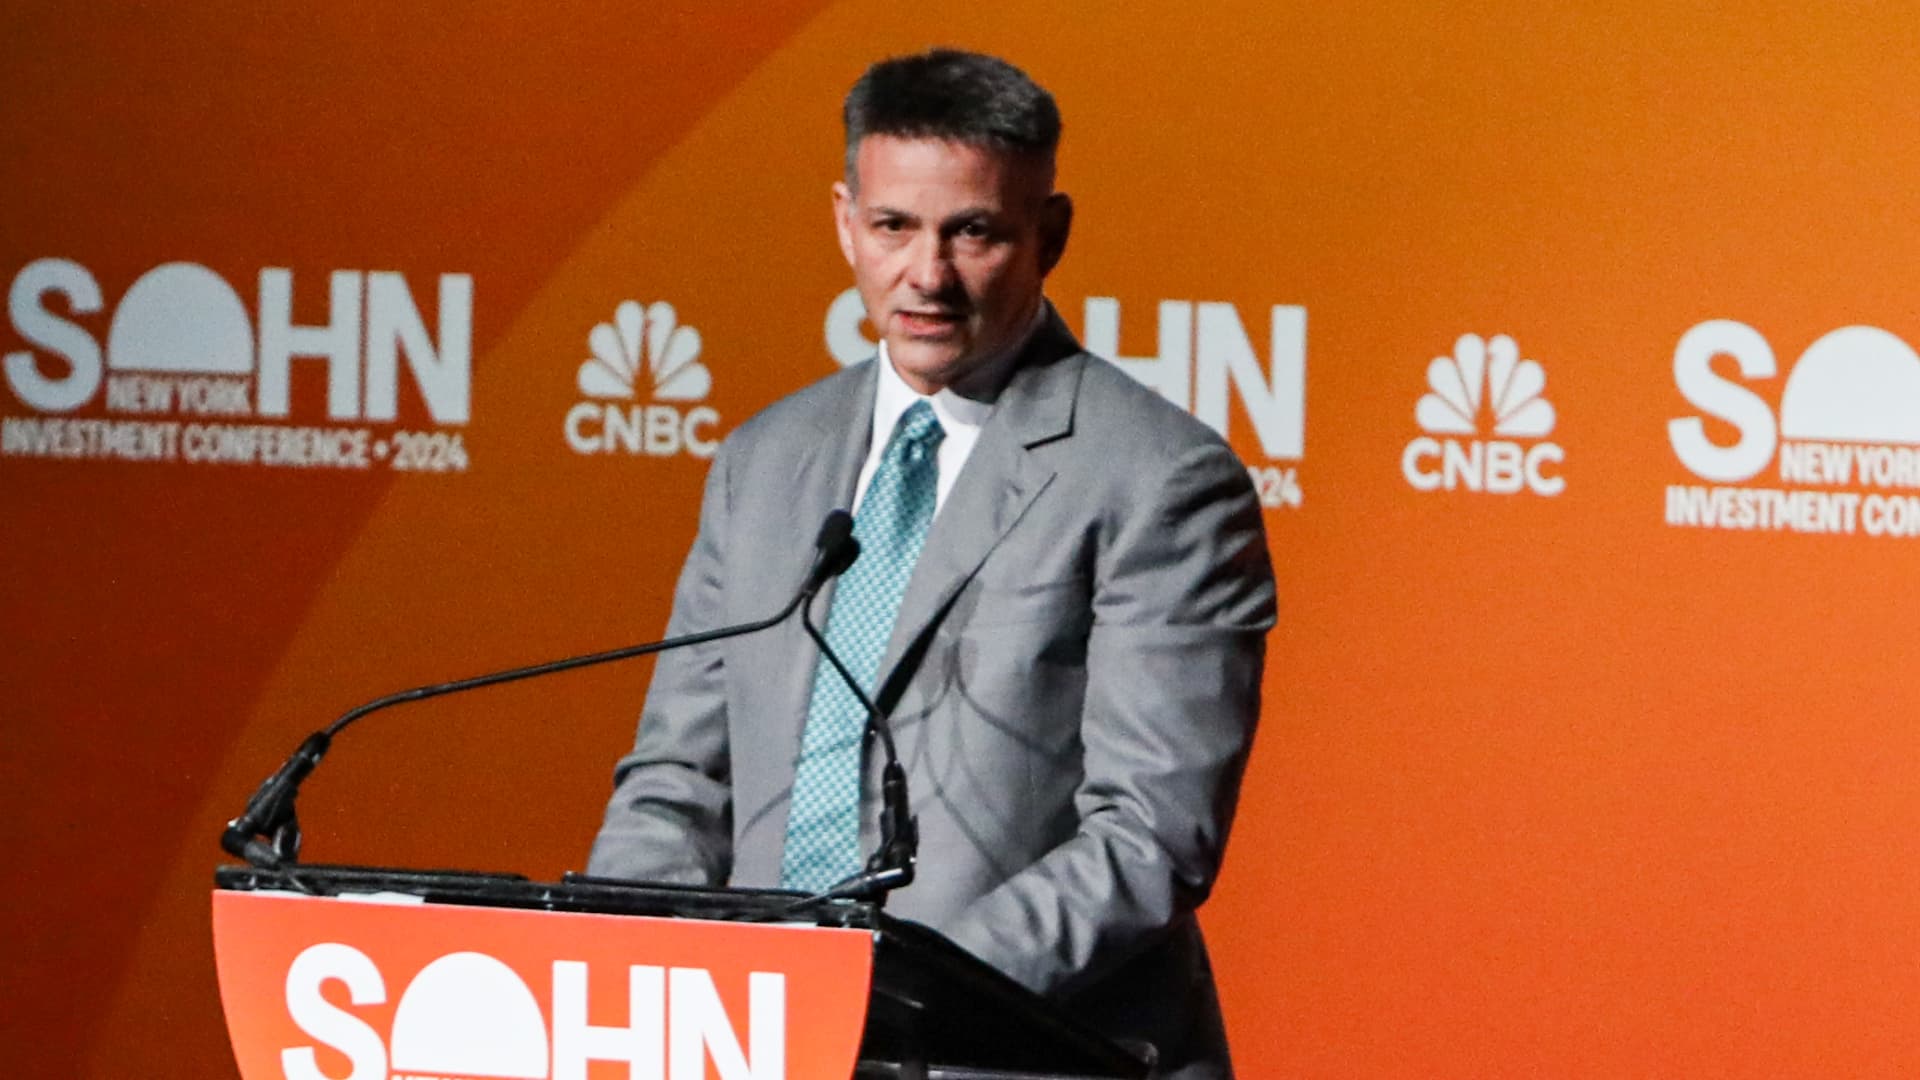 Greenlights David Einhorn unveils chemicals company Solvay as top investment idea [Video]